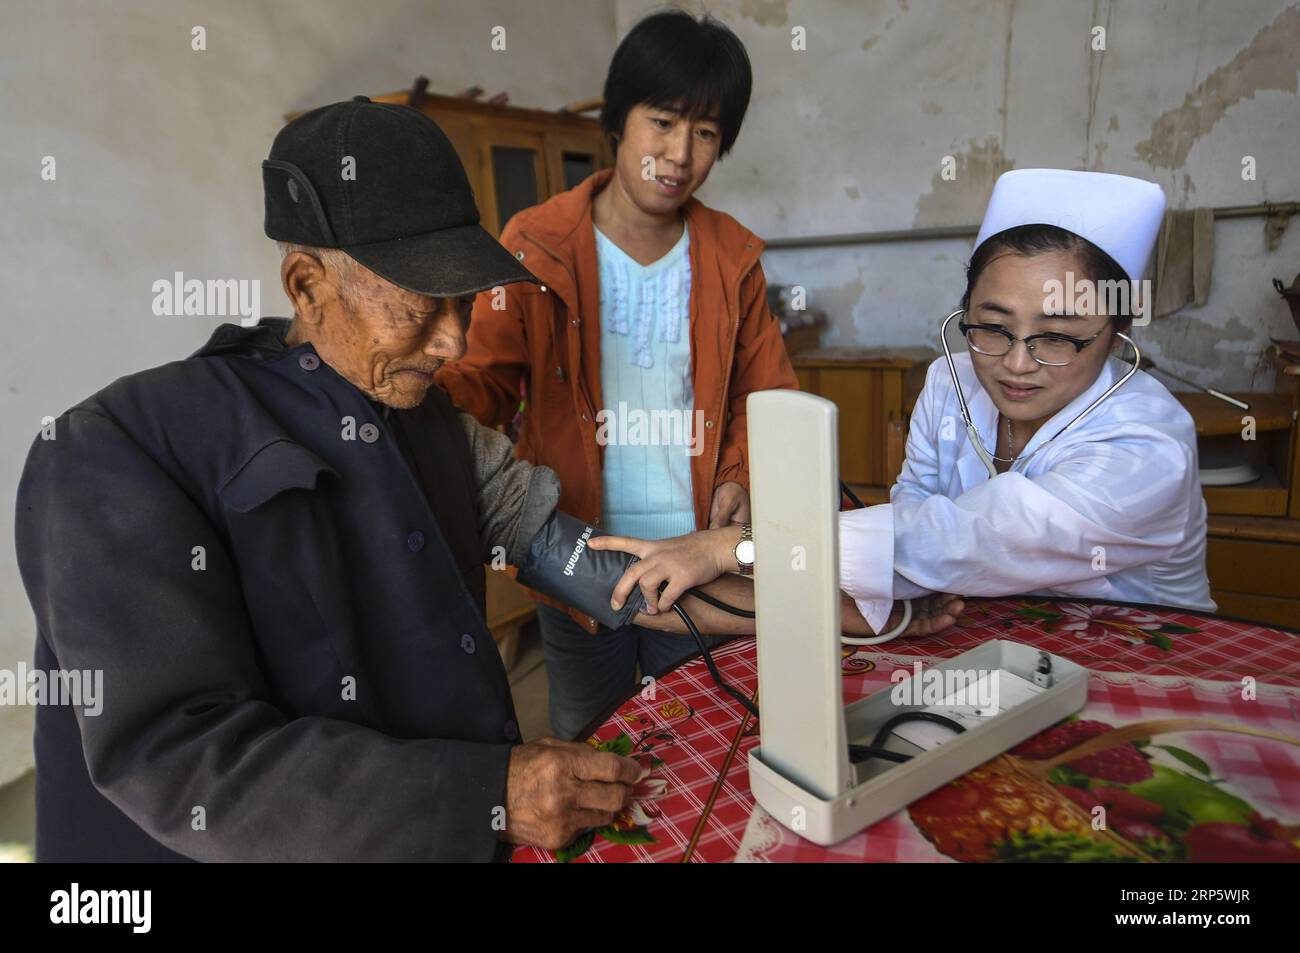 (181225) -- BEIJING, Dec. 25, 2018 -- A nurse checks the blood pressure for a resident at Nanma Village in Gucheng County, north China s Hebei Province, Oct. 29, 2017. The Chinese government spent 5.95 trillion yuan (about 862 billion U.S. dollars) on medical services from 2013 to 2017, with an average annual increase of 11.7 percent, according to a report submitted to National People s Congress, China s top legislature. China s fiscal spending on medical services in 2017 was 1.4 trillion yuan, a 55.5-percent increase from 2013, accounting for 7.1 percent of national fiscal spending. The avera Stock Photo